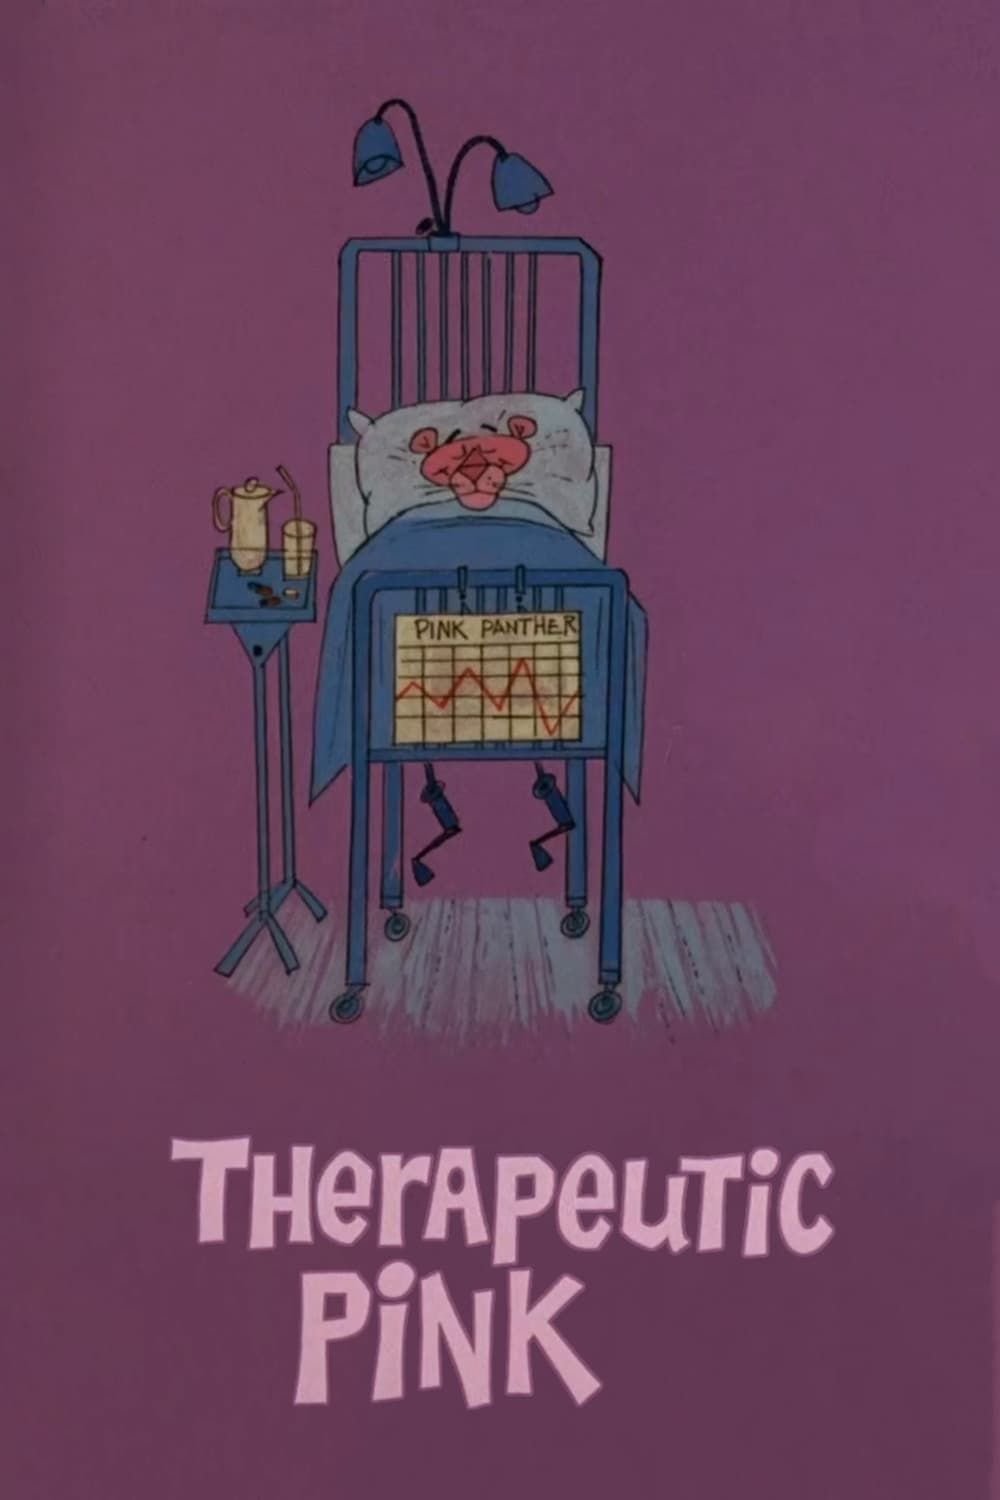 Therapeutic Pink (1977)